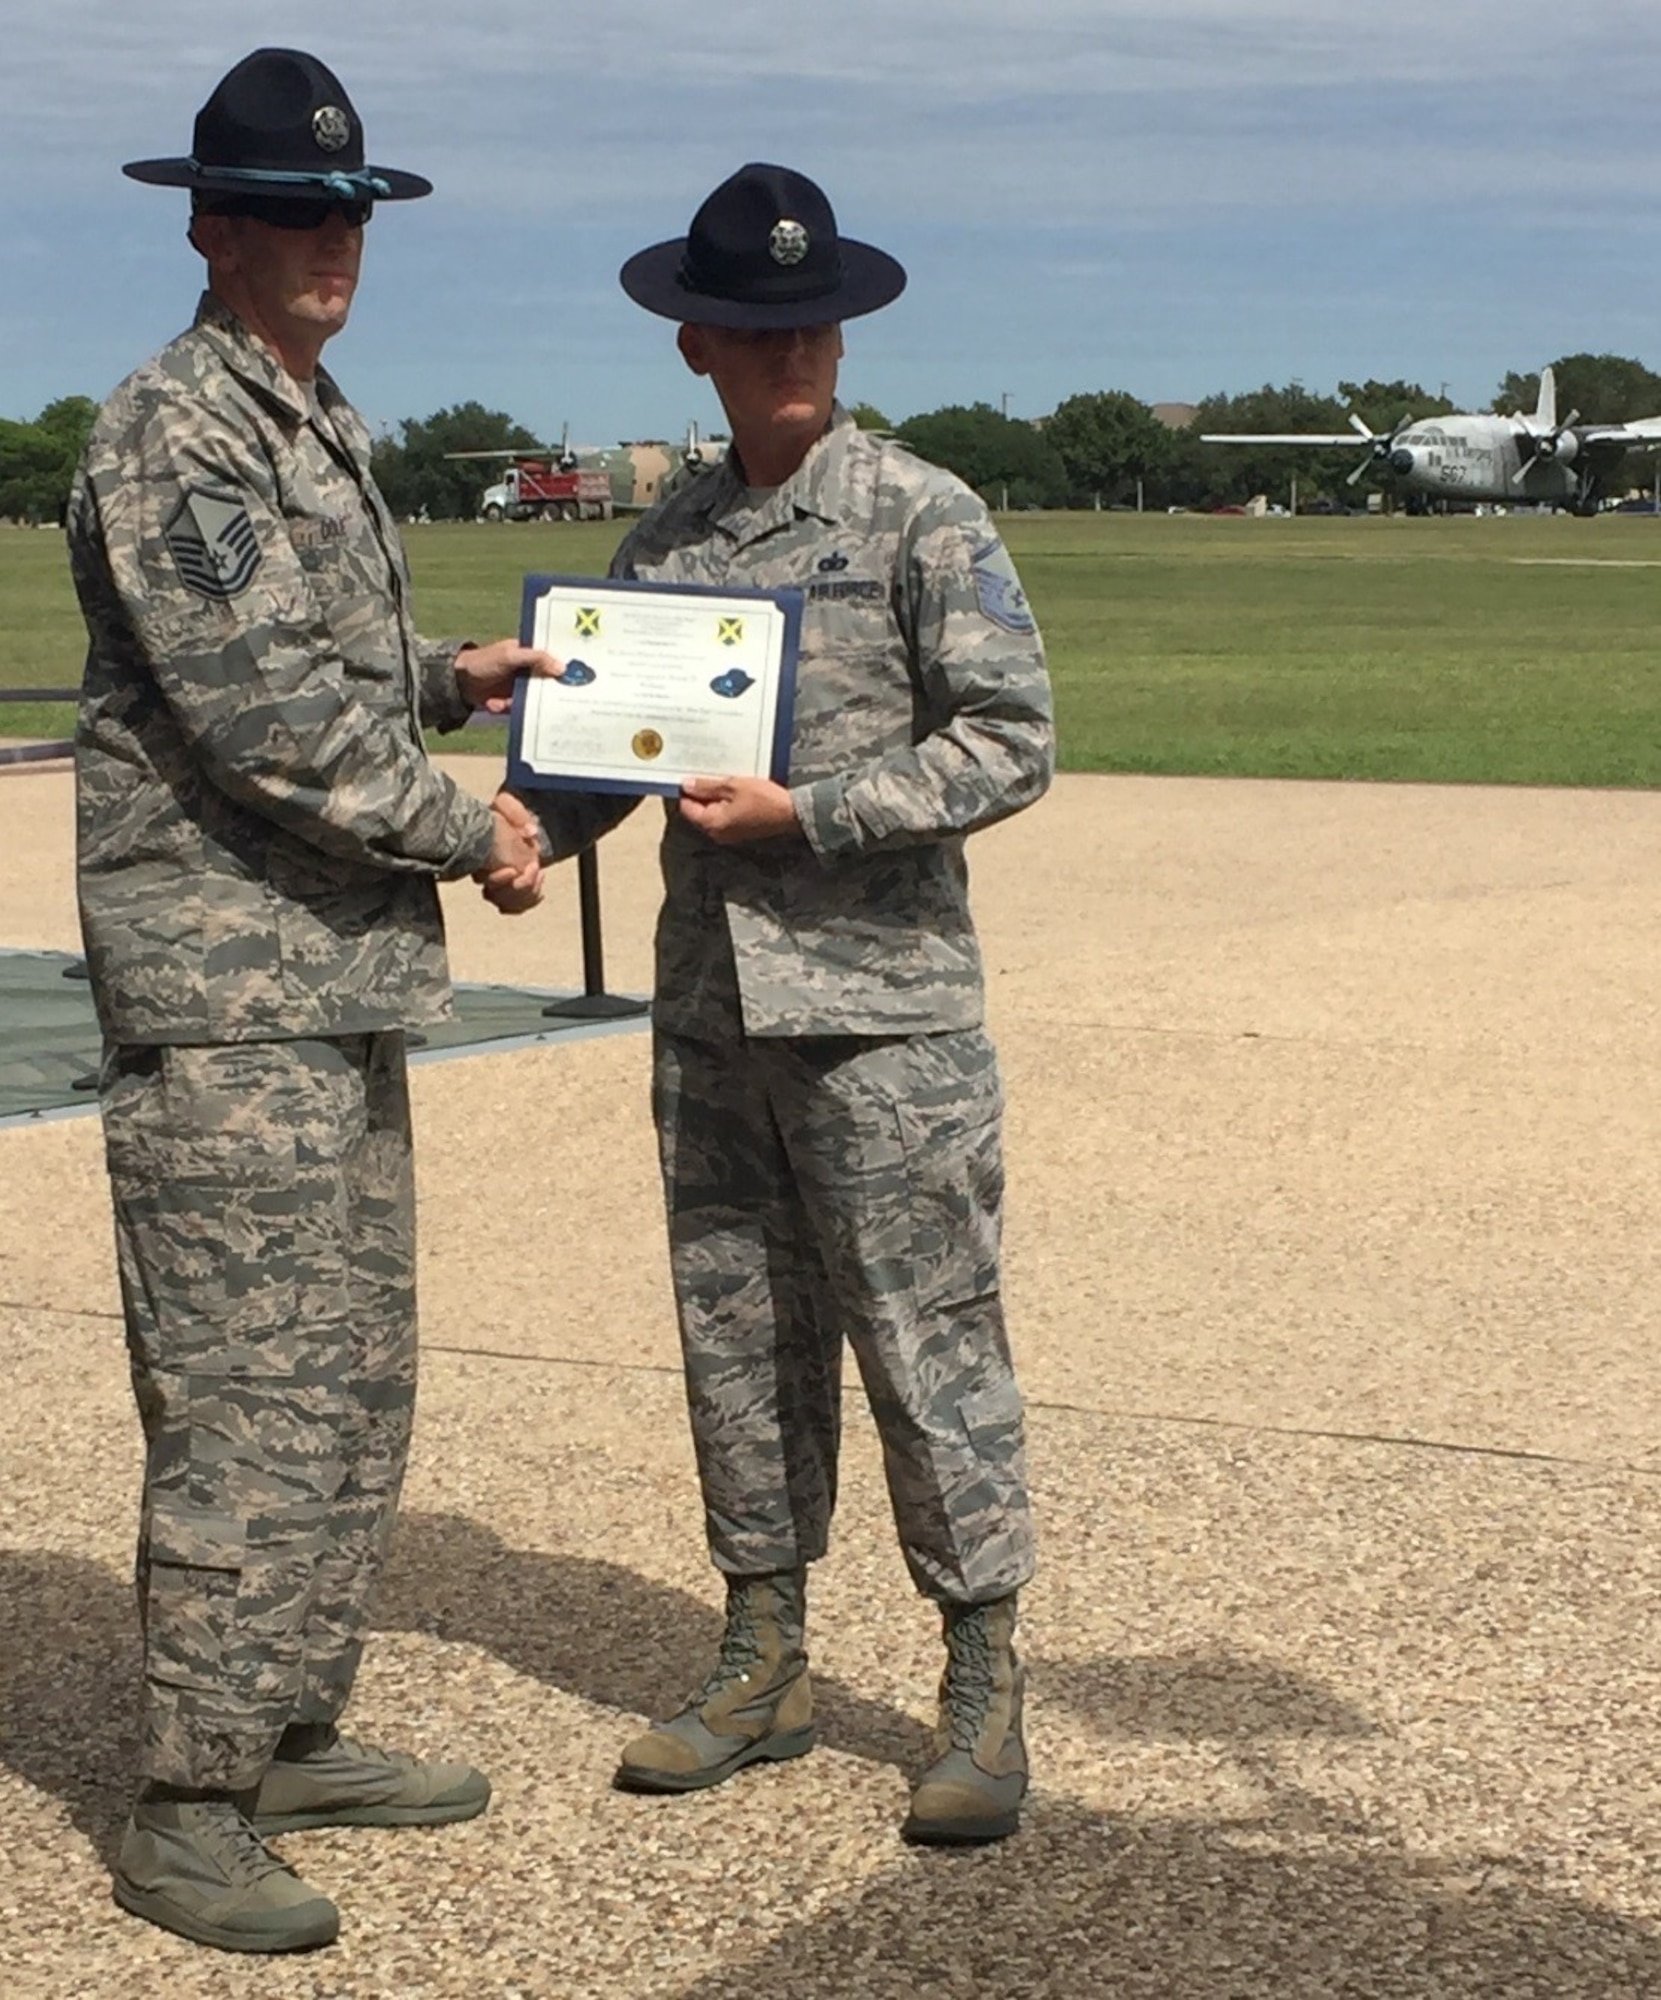 Master Sgt. Joseph Dole (left), 331st Training Squadron, Joint Base San Antonio-Lackland, Texas, Blue Rope Association president, presents Master Sgt. Jason Wagner, 433rd Training Squadron, with a certificate recognizing his acceptance into the Master Military Instructor “Blue Rope” Association. (Air Force photo)